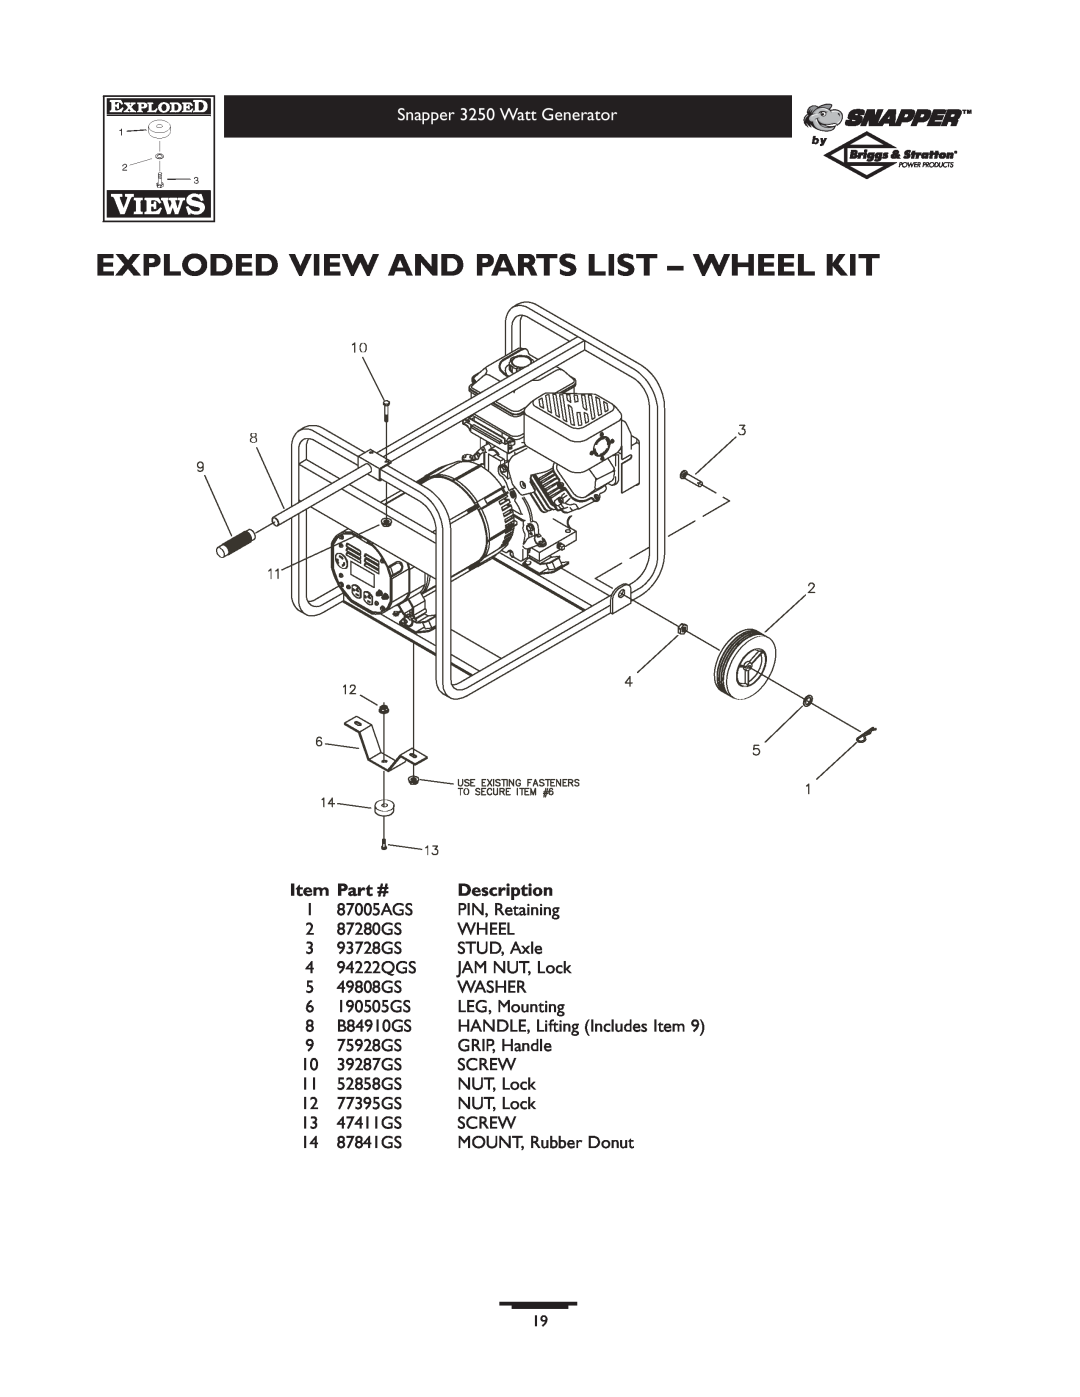 Snapper owner manual Exploded View And Parts List - Wheel Kit, Snapper 3250 Watt Generator, Description 